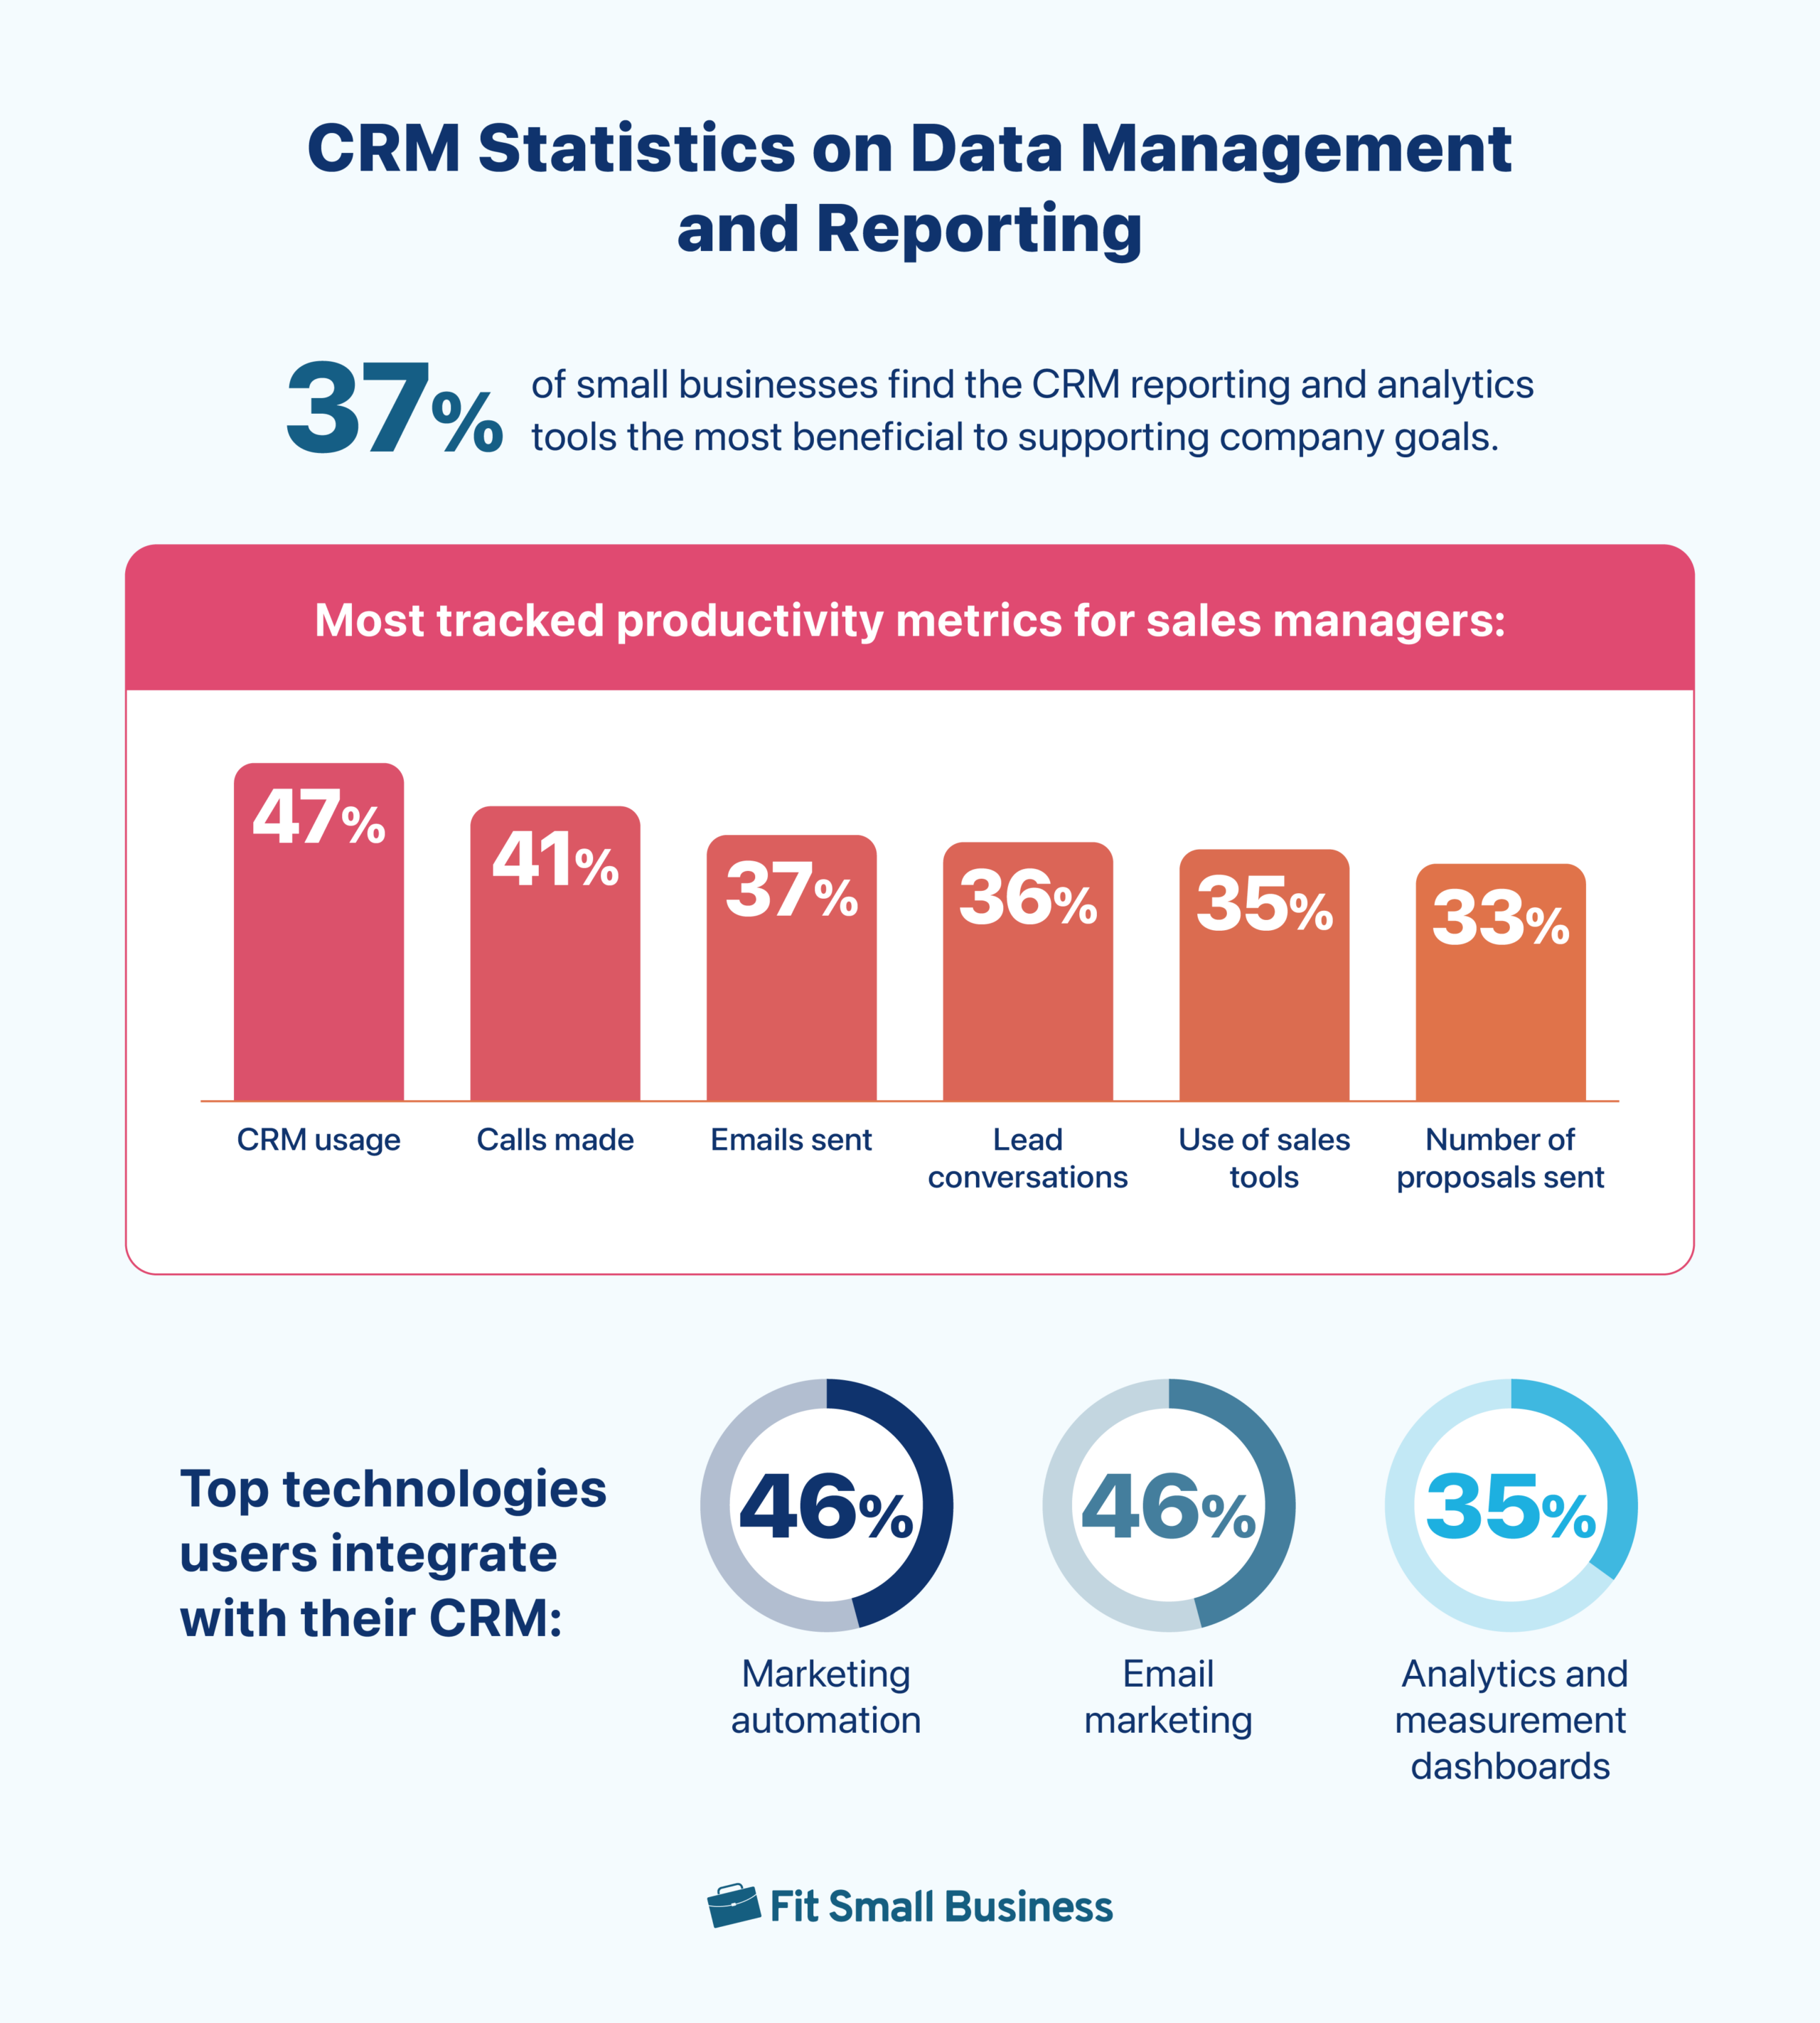 An infographic containing several CRM statistics on data management and reporting.